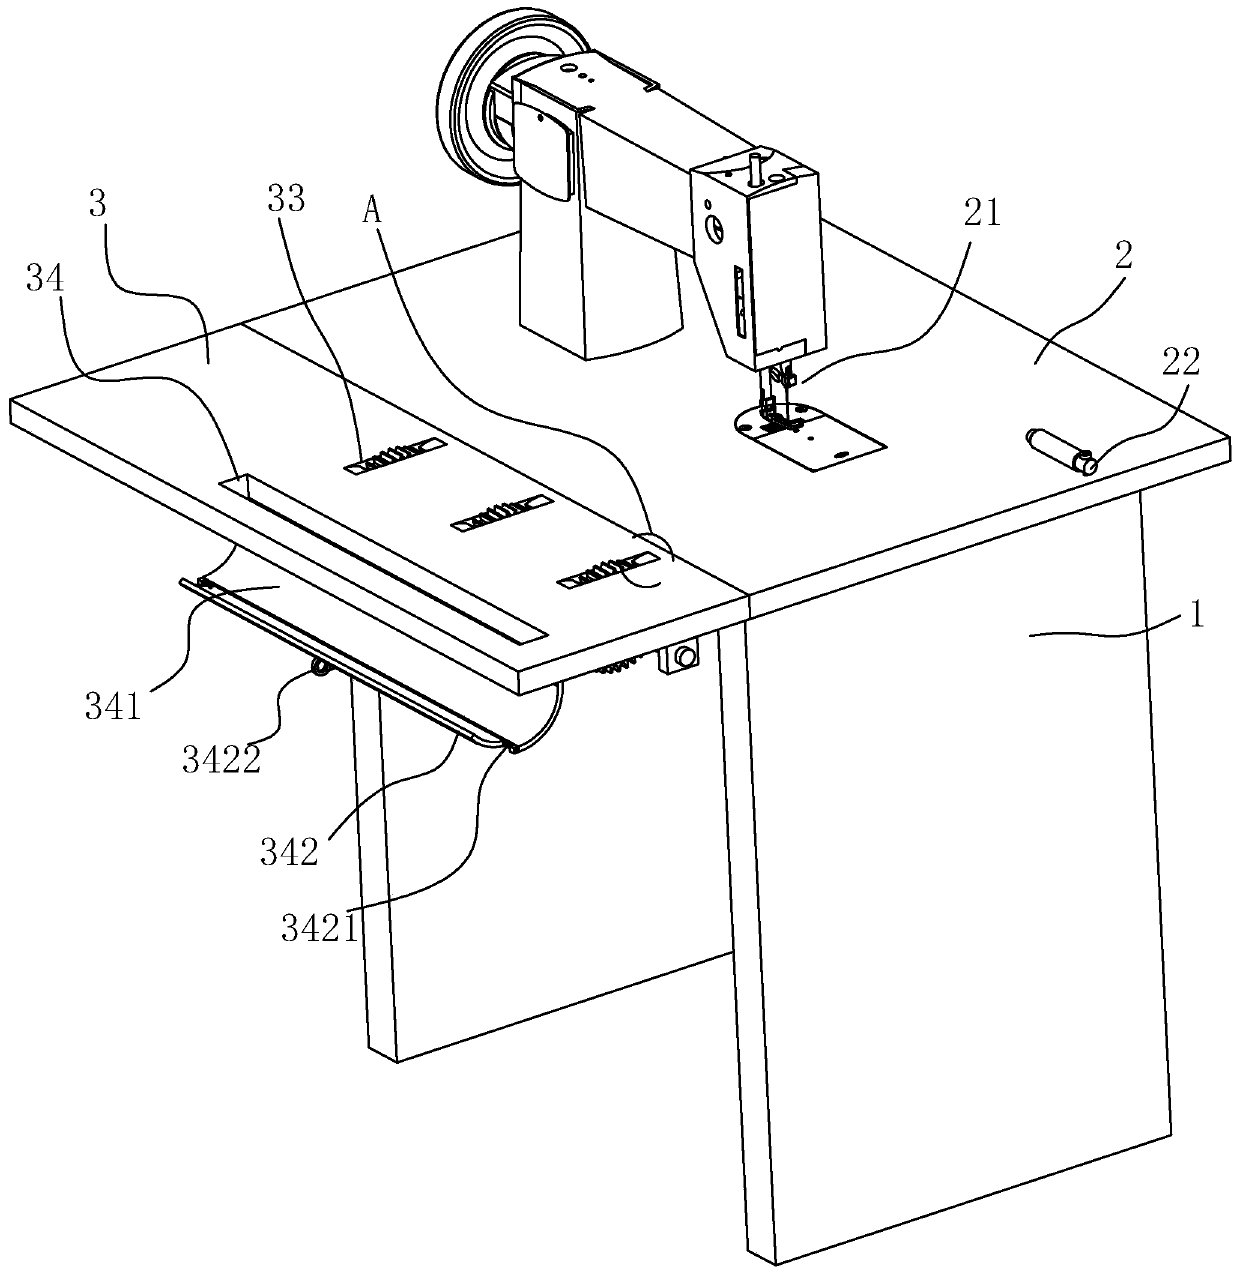 Sewing machine capable of reducing buildup